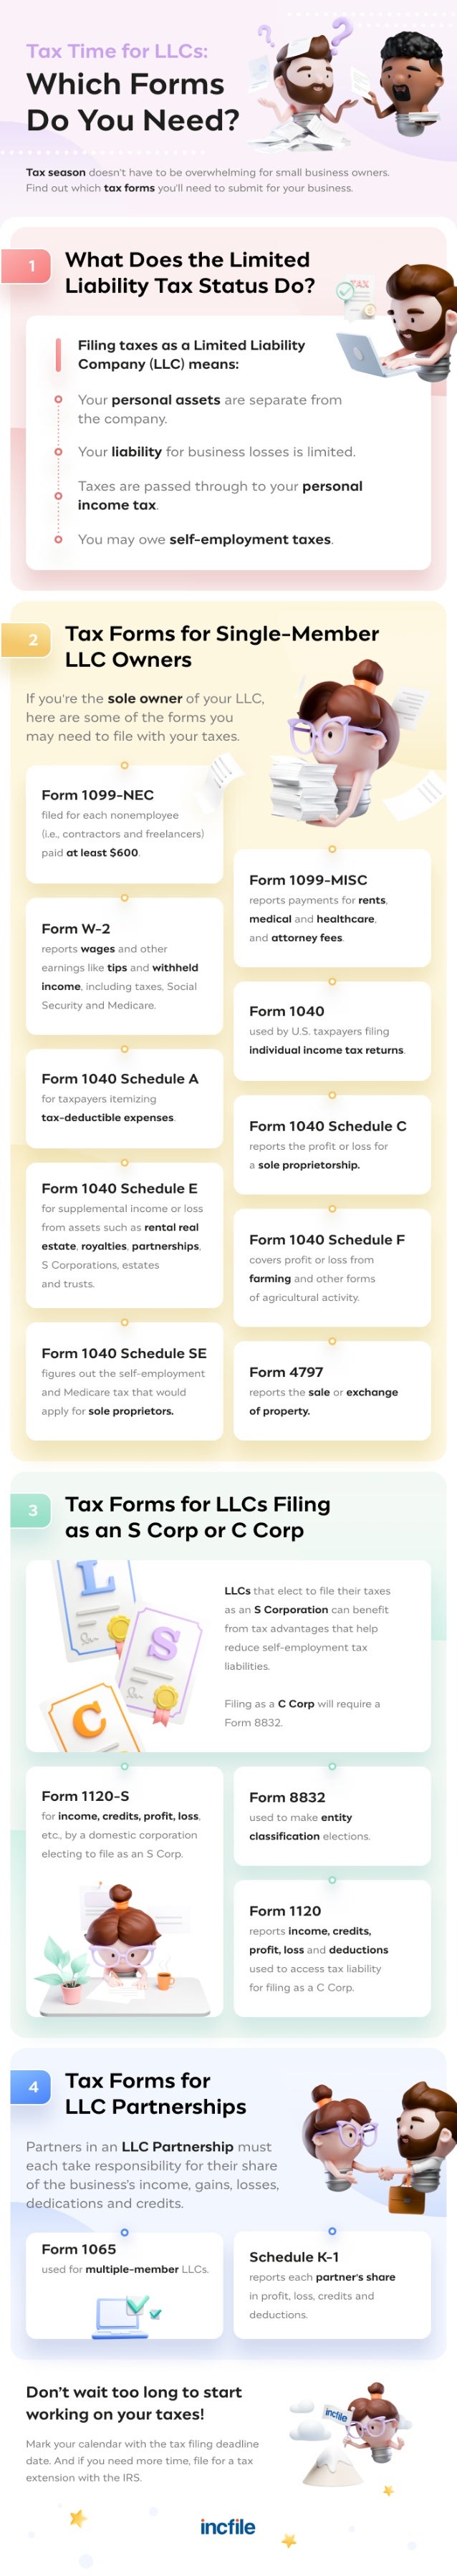 What Tax Forms Do I Need to File as an LLC?